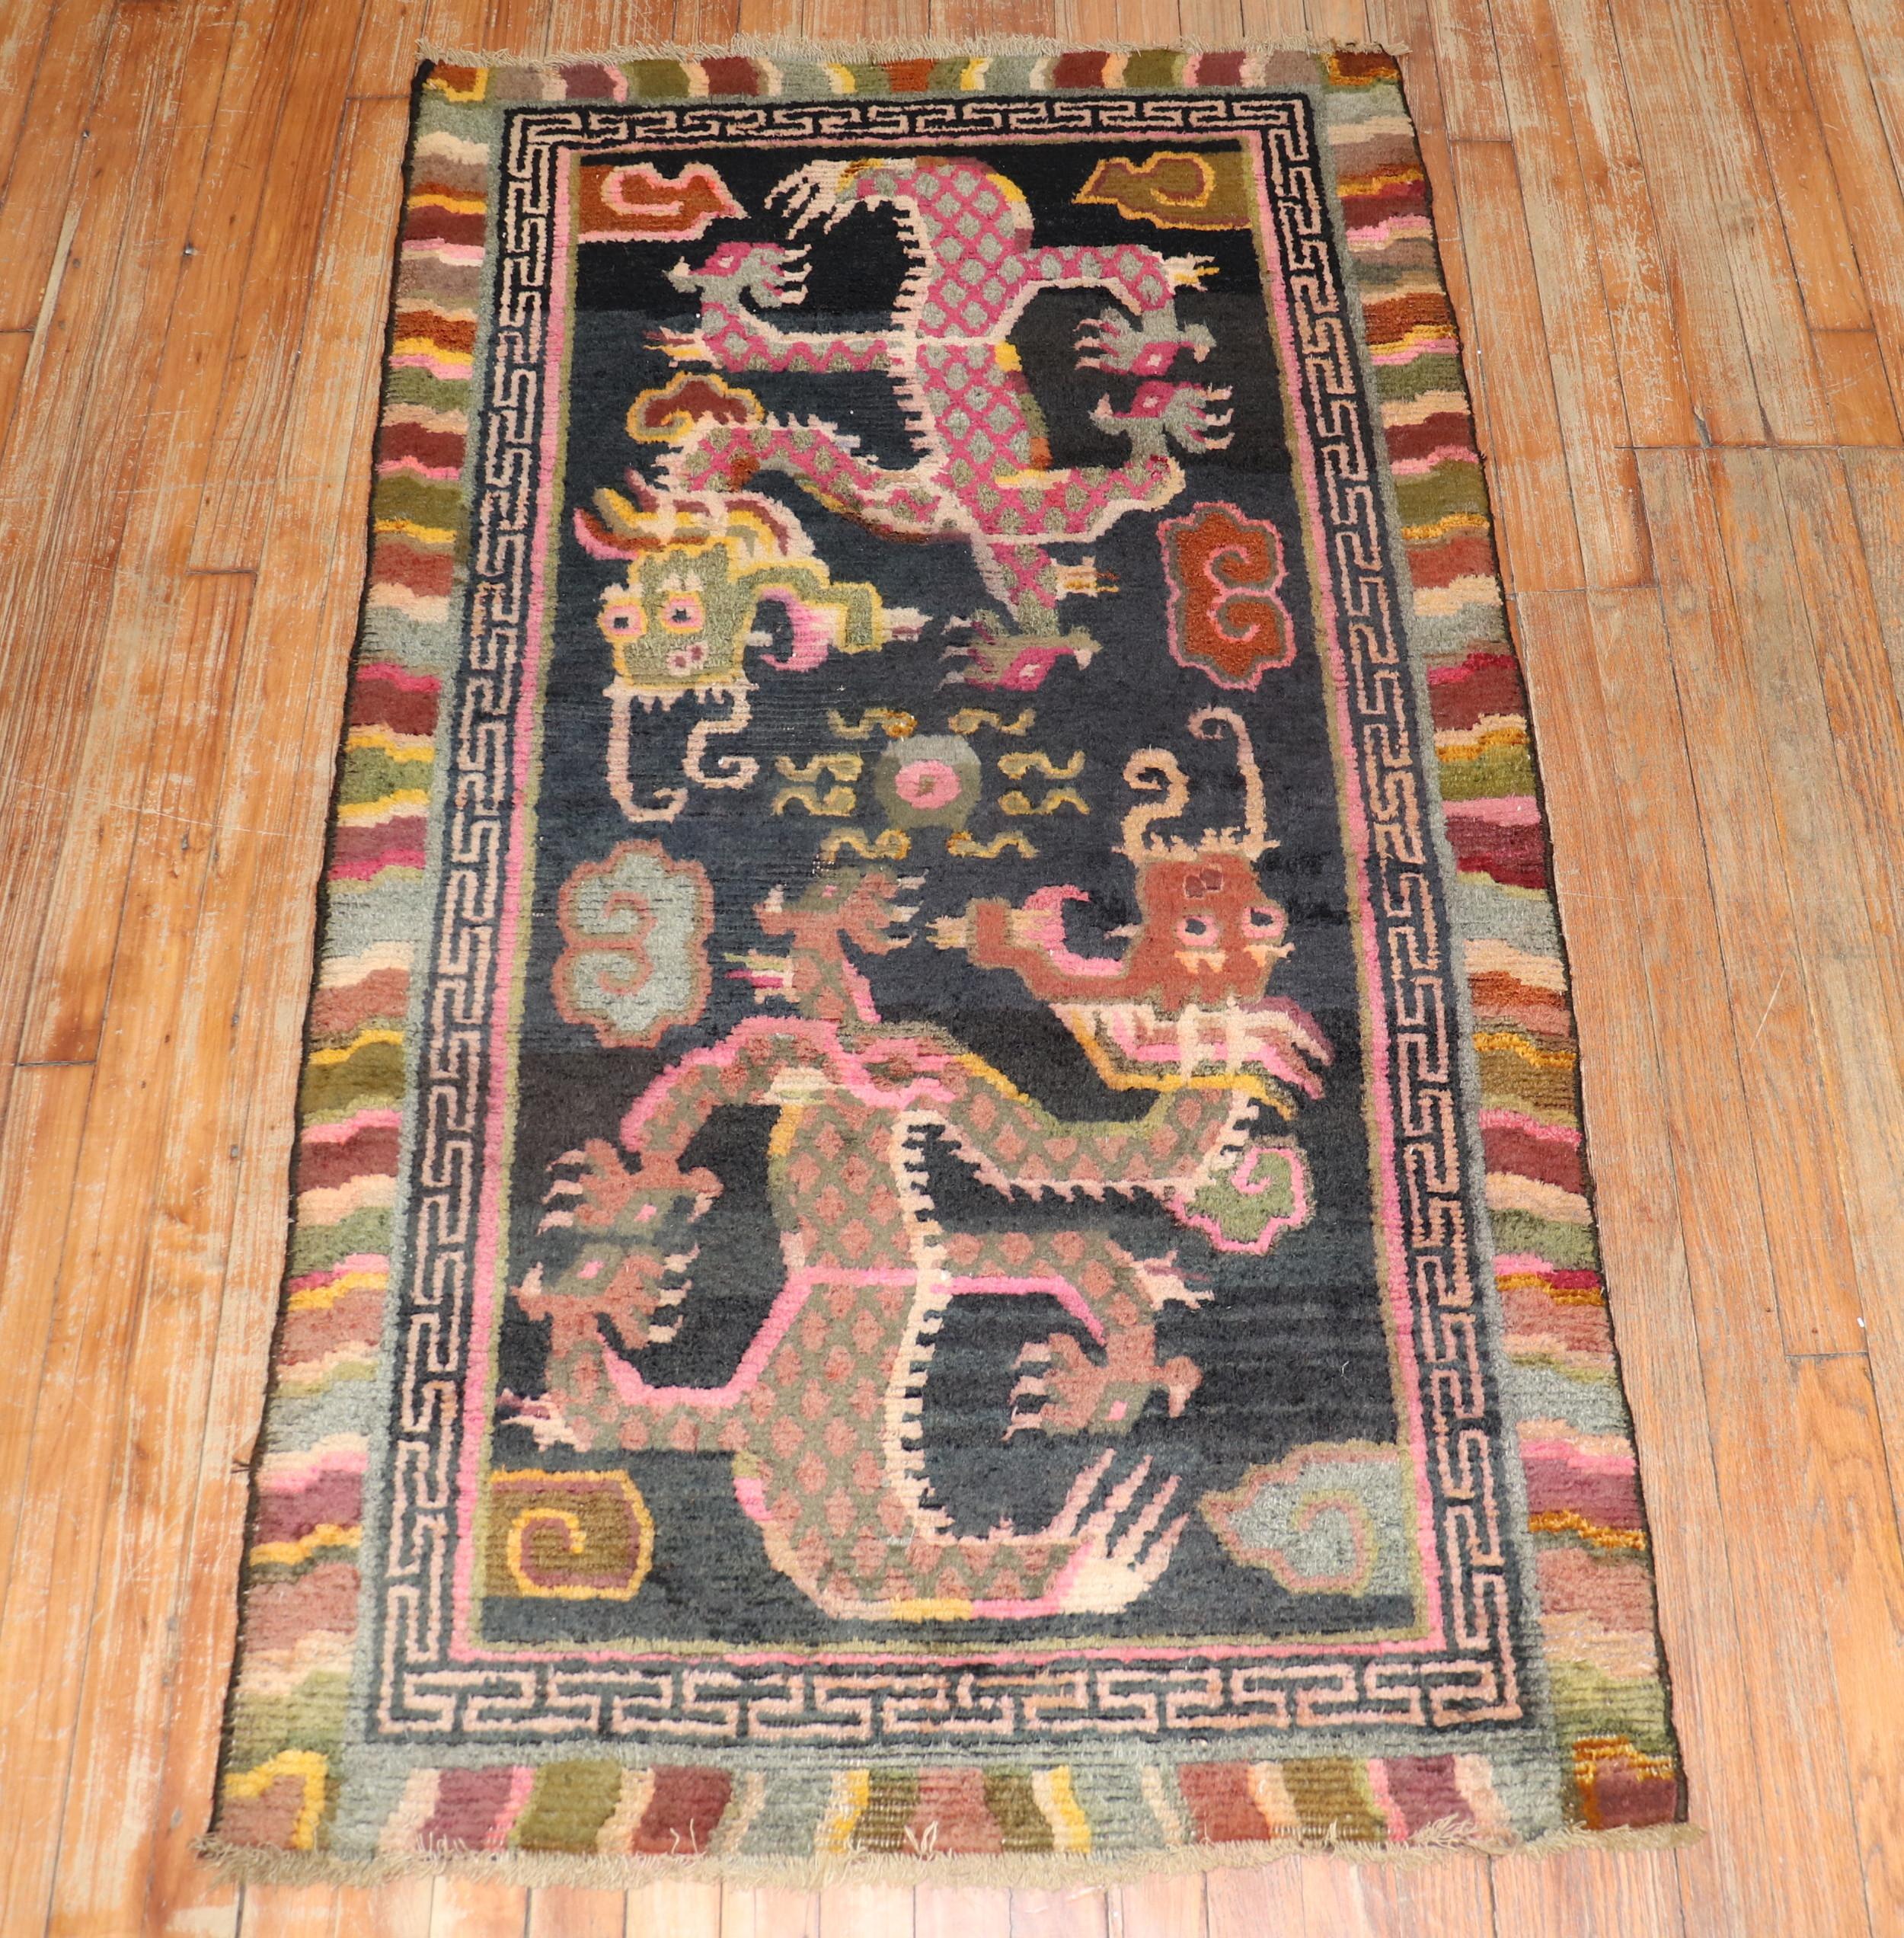 1st Quarter of the 20th-century Tibetan rug with a large-scale dragon motif.
The wool is soft, Texture and patina are fabulous. Can also make for a suitable wall hanging.

Measures: 2'9